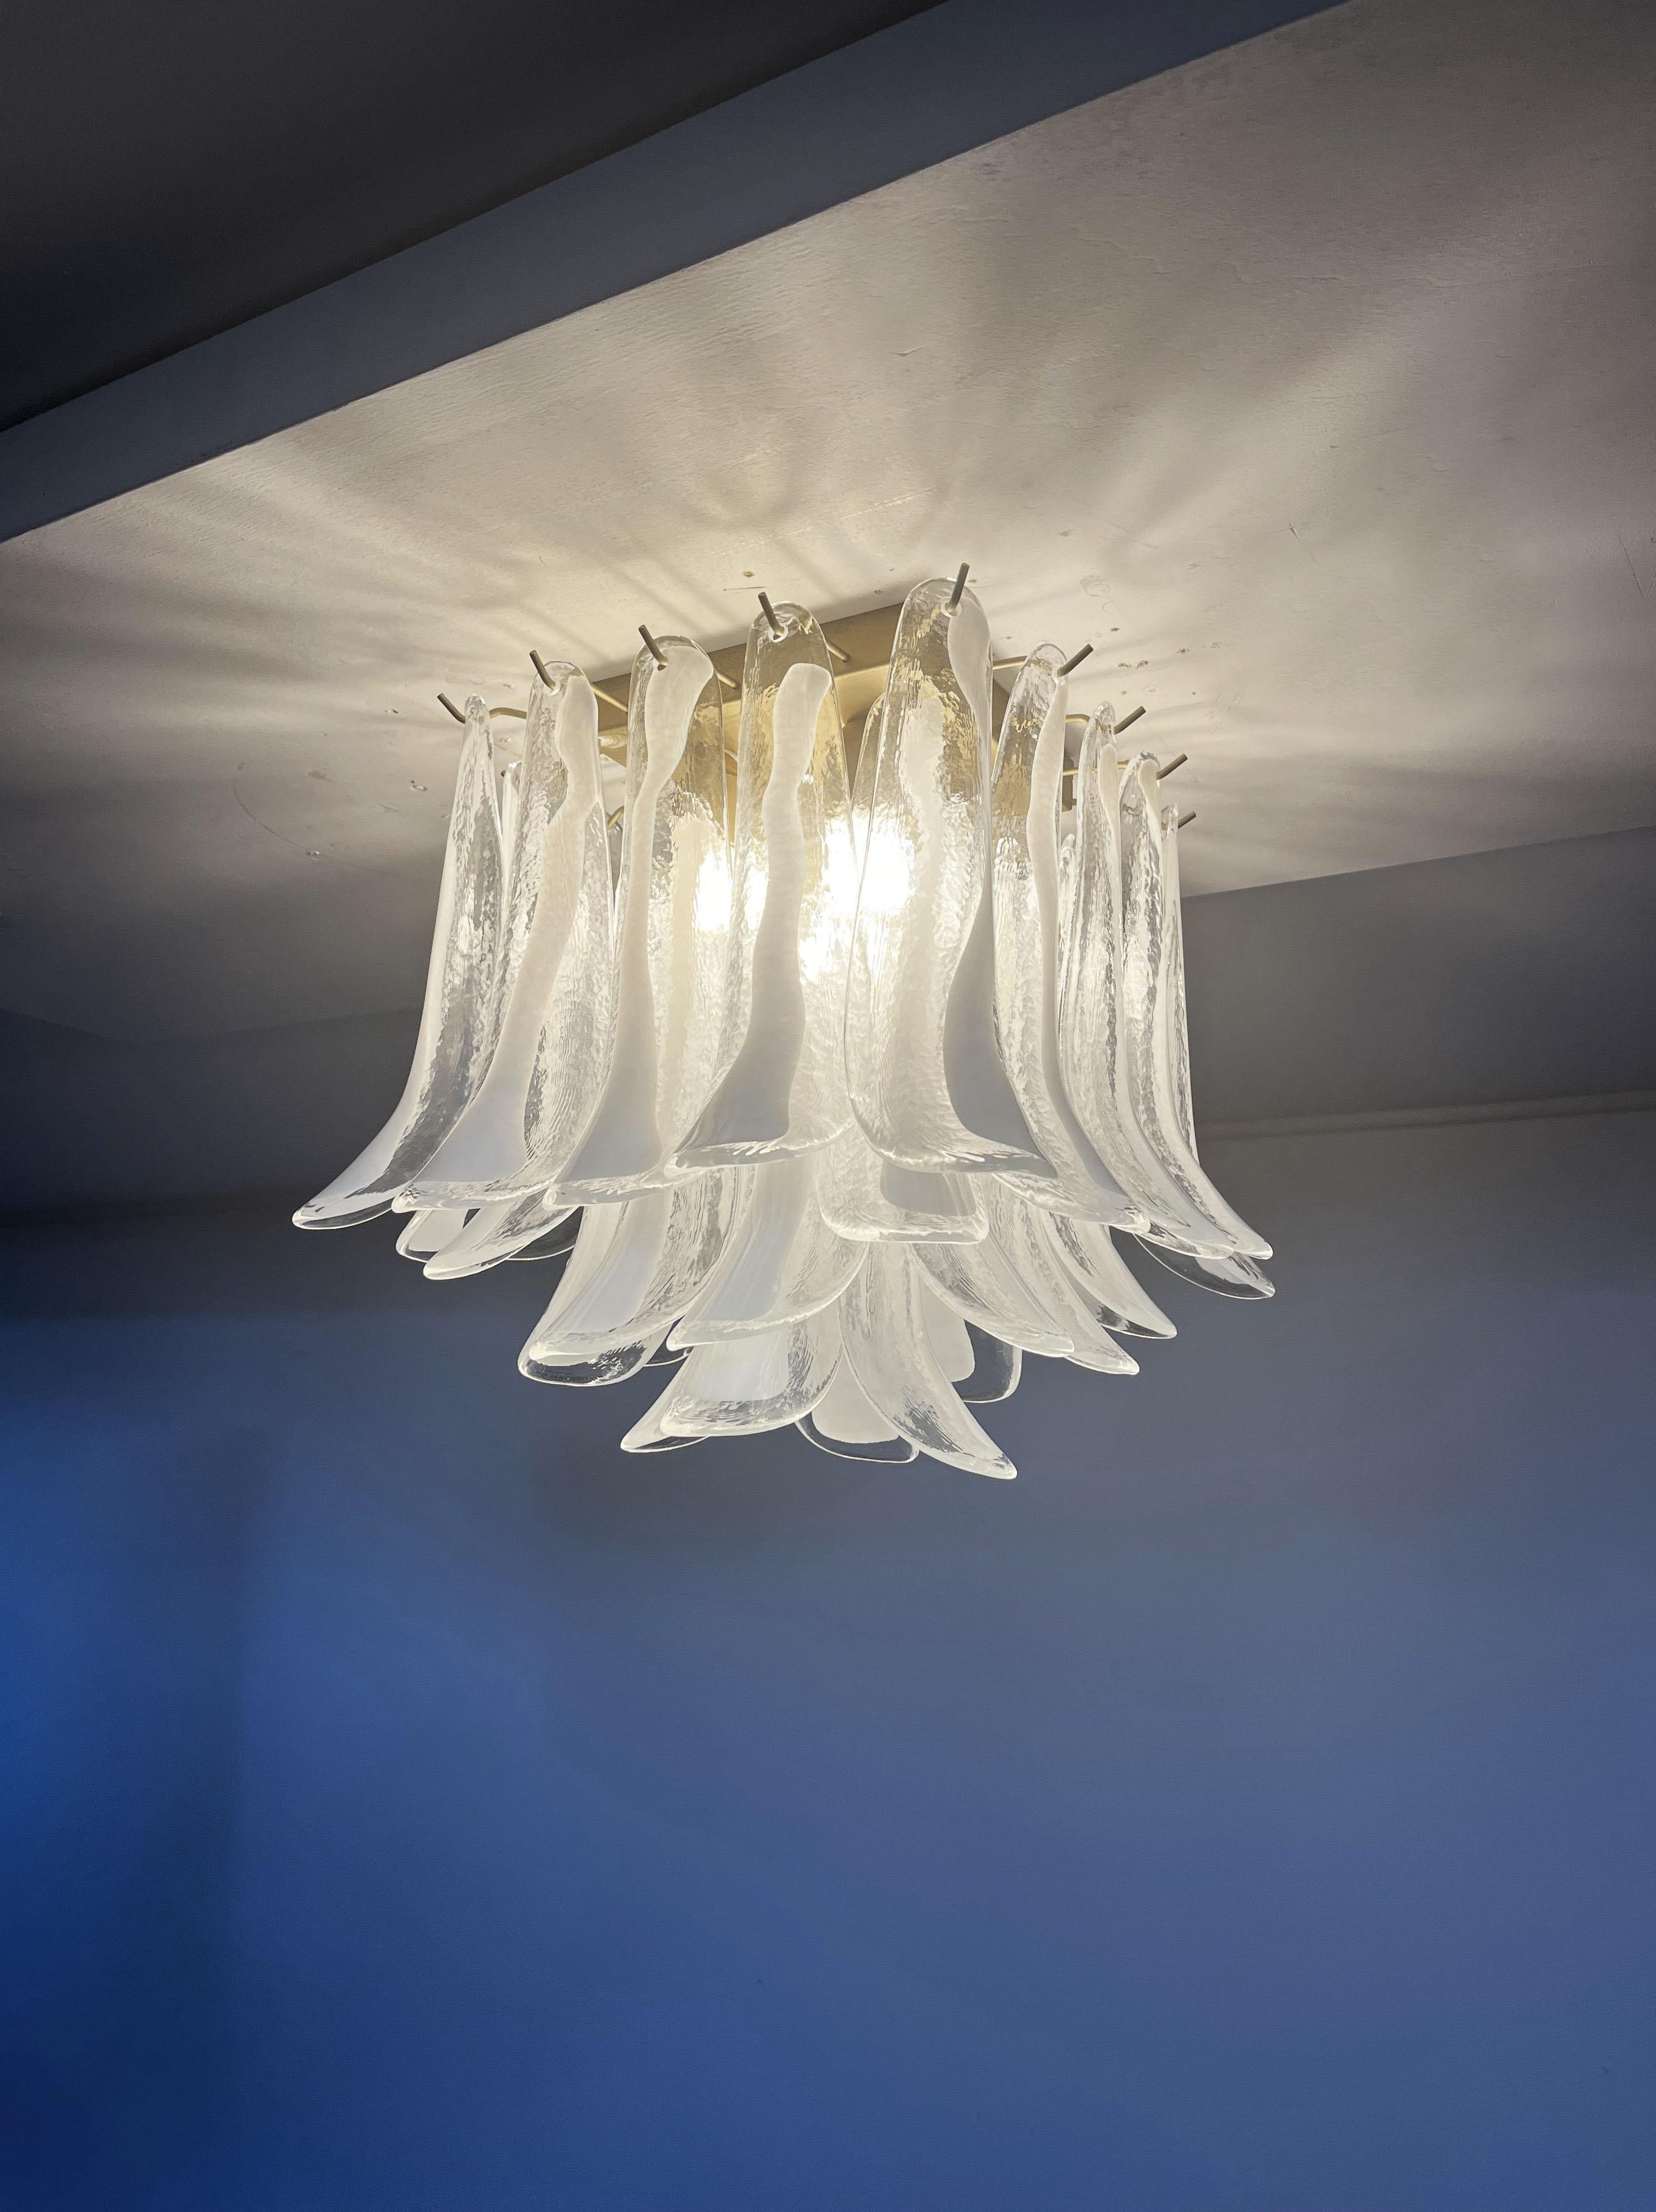 Spectacular ceiling lamp with 32 Murano lattimo glass petals (clear with white lattimo spot) in golden painted metal frame.  Elegant lighting object.
Period: late XX century
Dimensions: 19,20 inchs (50 cm) height; 19,20 inches (50 cm) width; 19,20